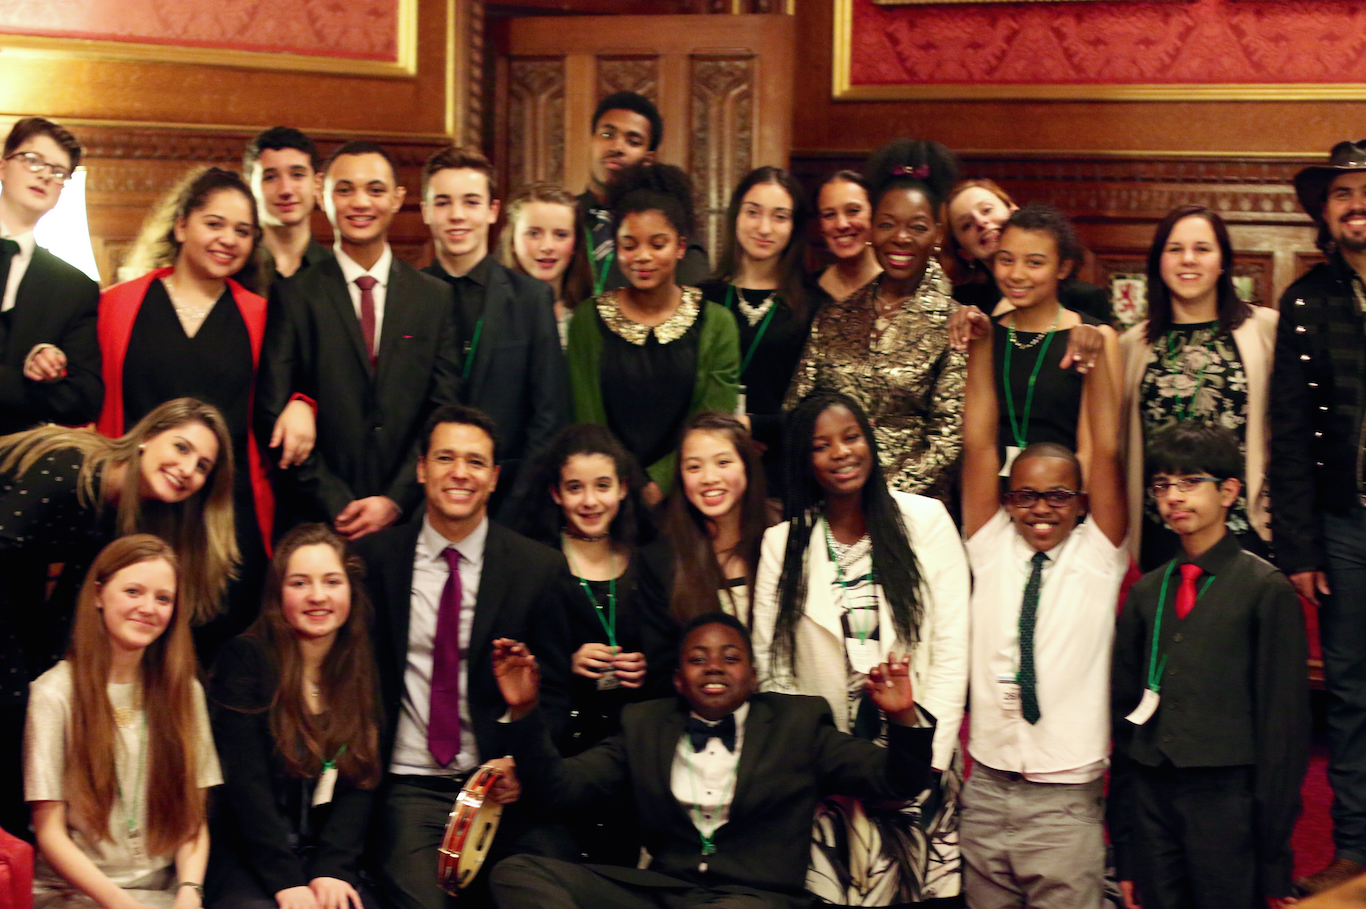 young musicians from world heart beat music academy performance at speakers house in london